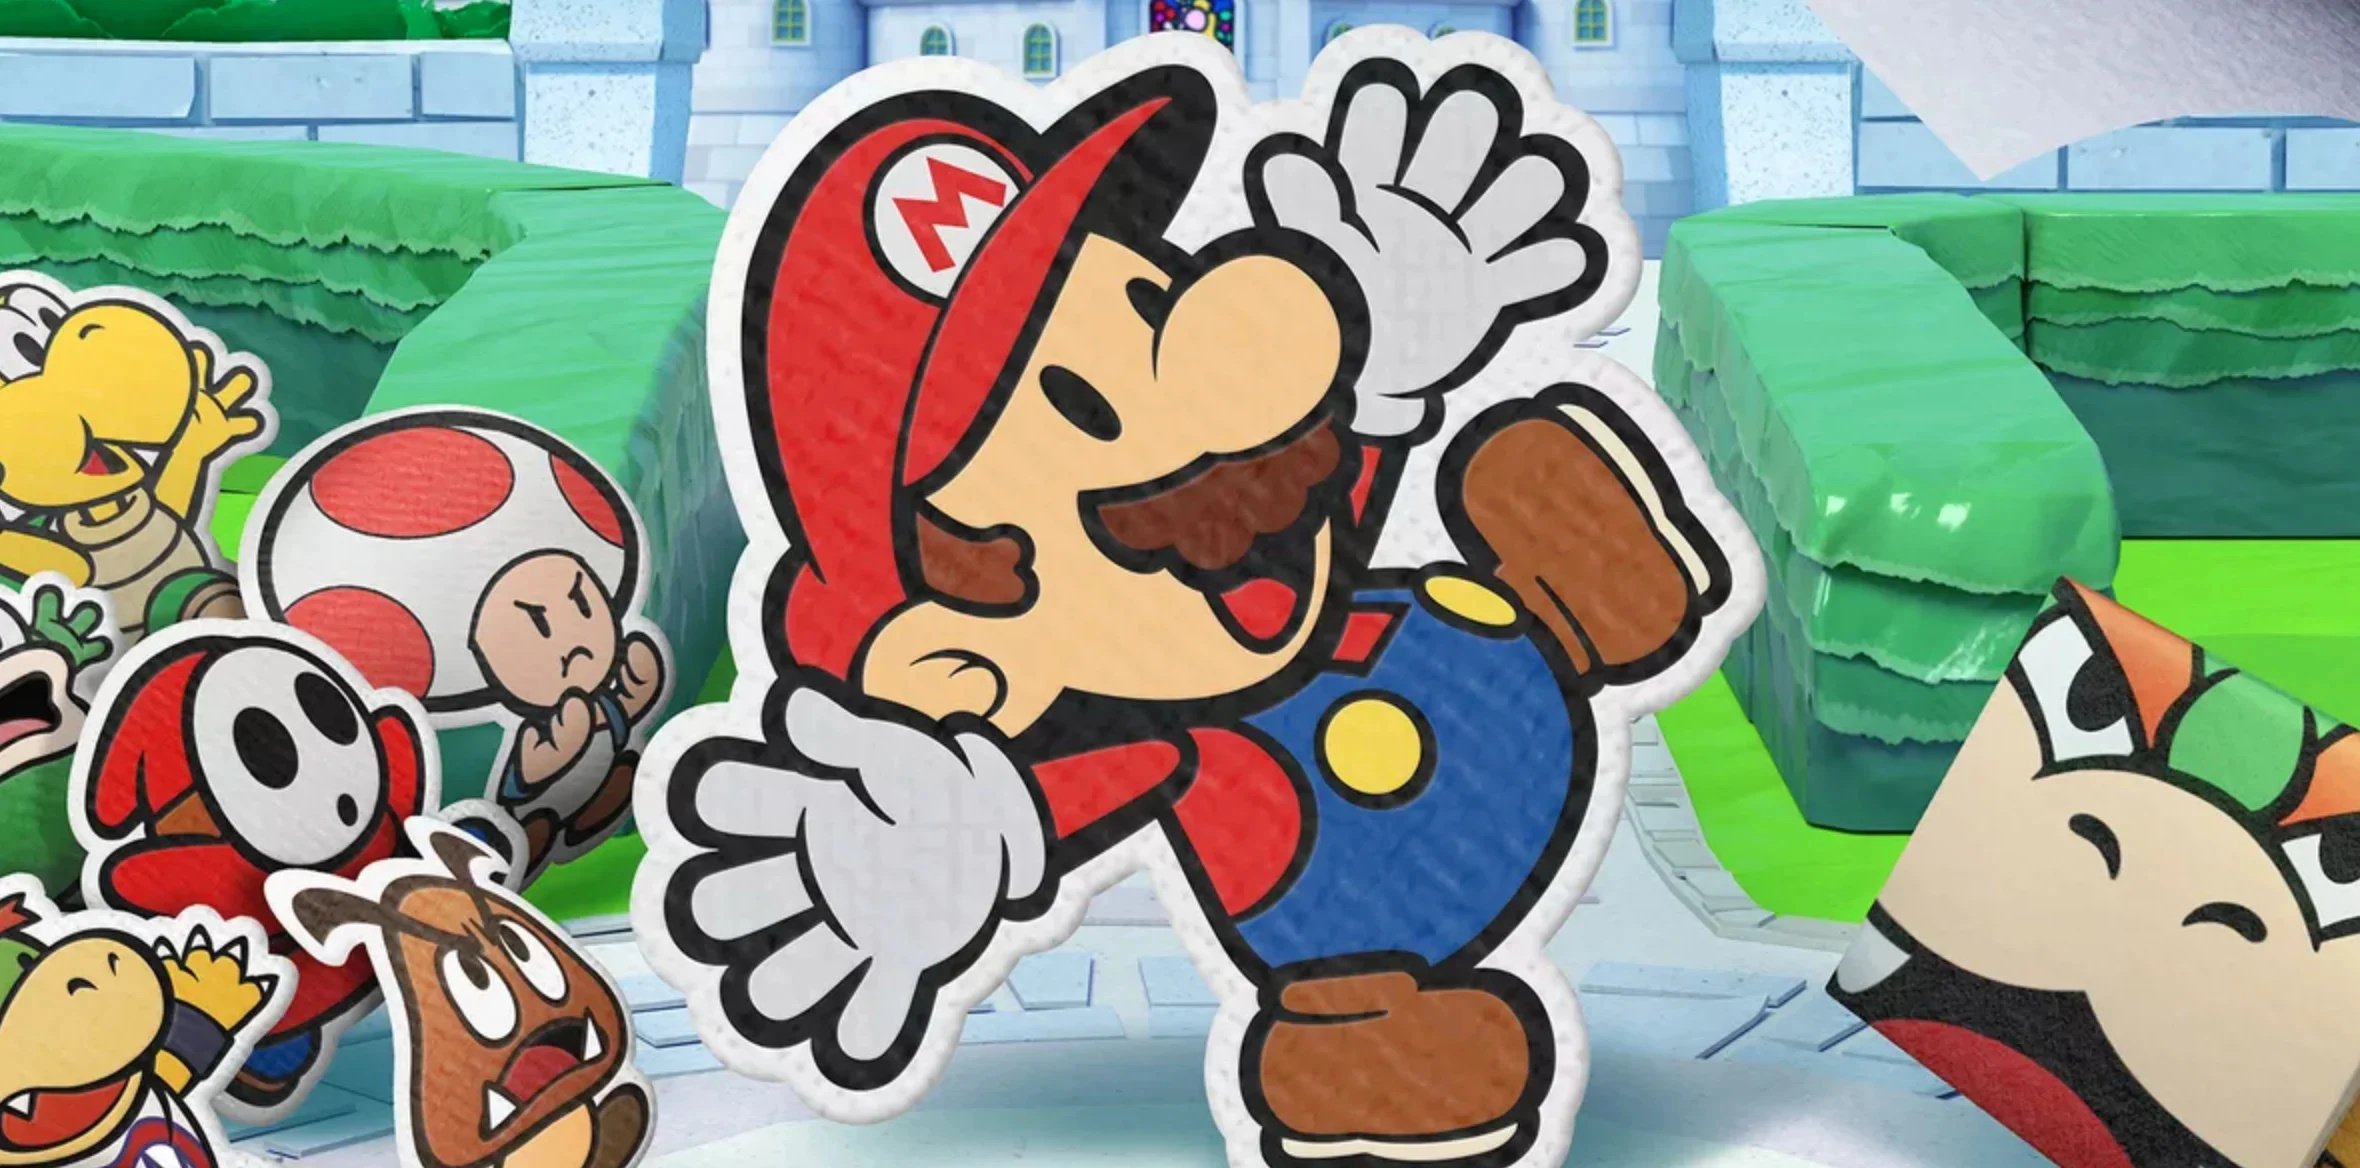 Paper Mario Producer Says His Team Has "Almost Complete Control" Over